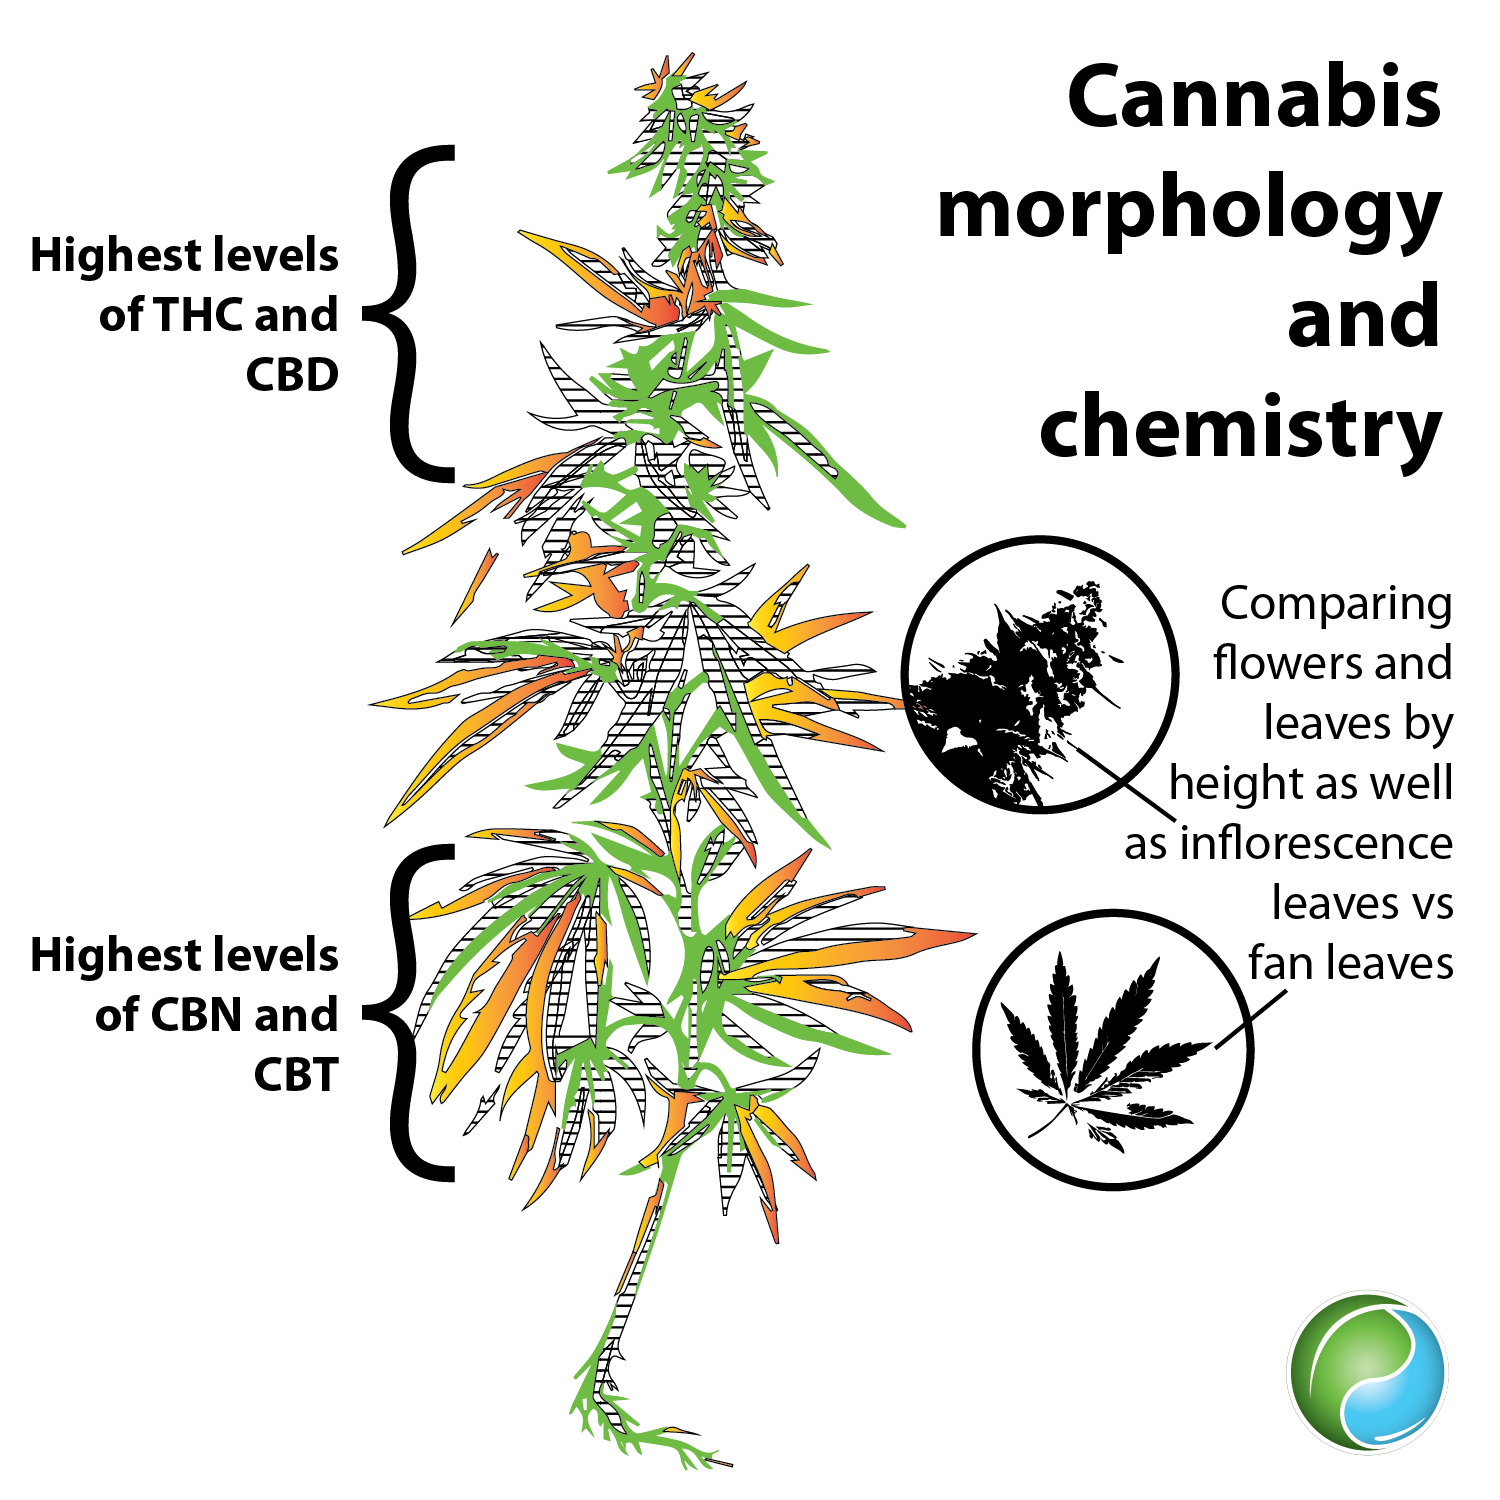 Cannabis Morphology and Chemistry